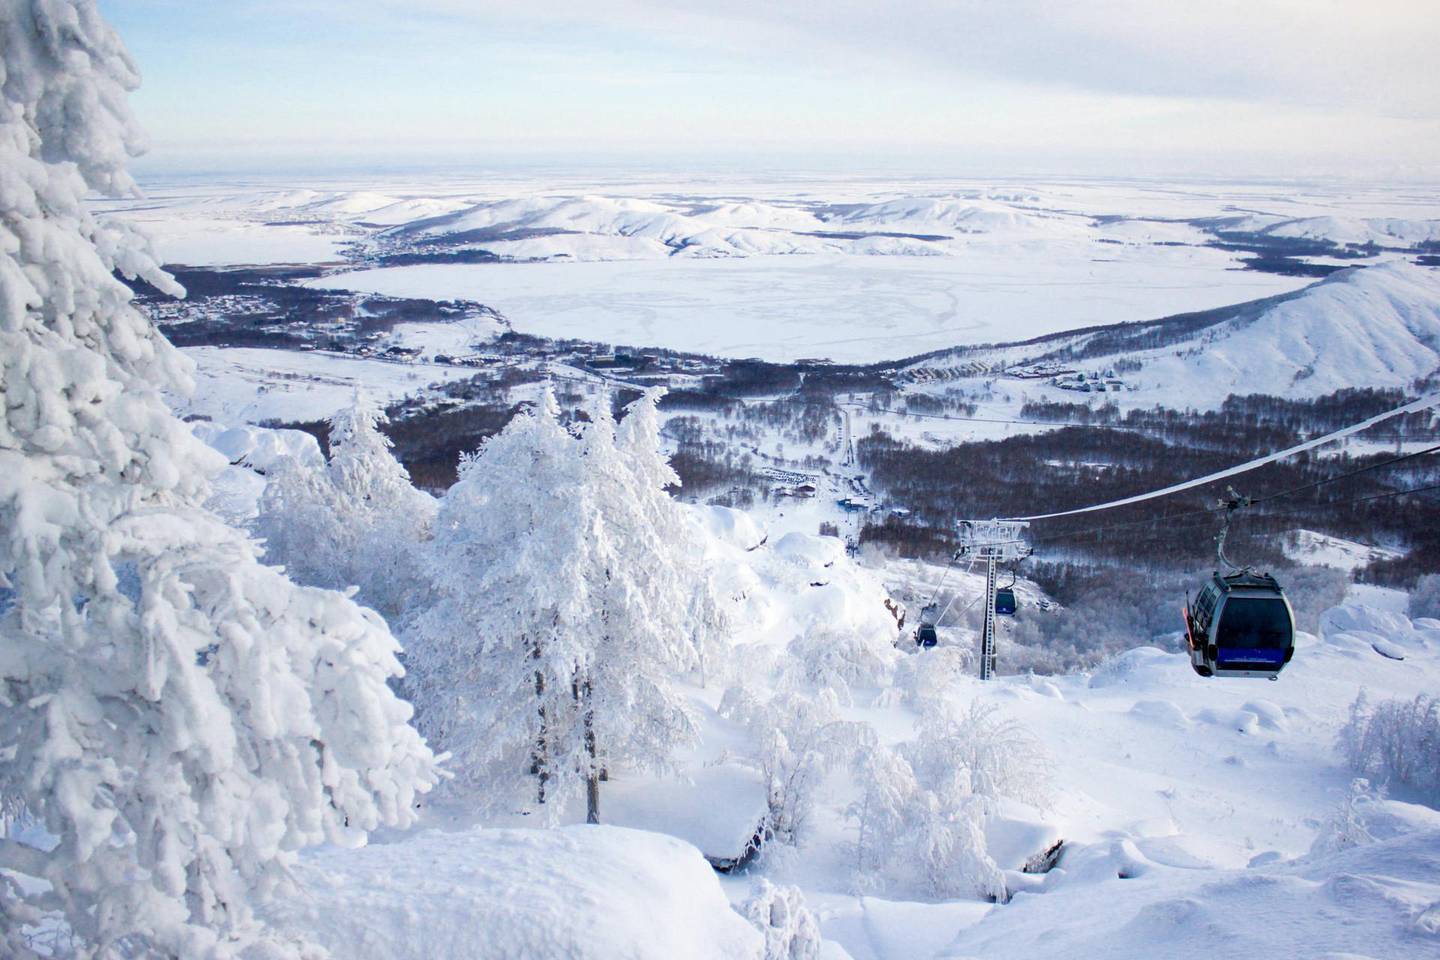 PD4HWE Winter landscape, snowy Ural mountains in cloudy day, Russia. Image shot 12/2014. Exact date unknown.